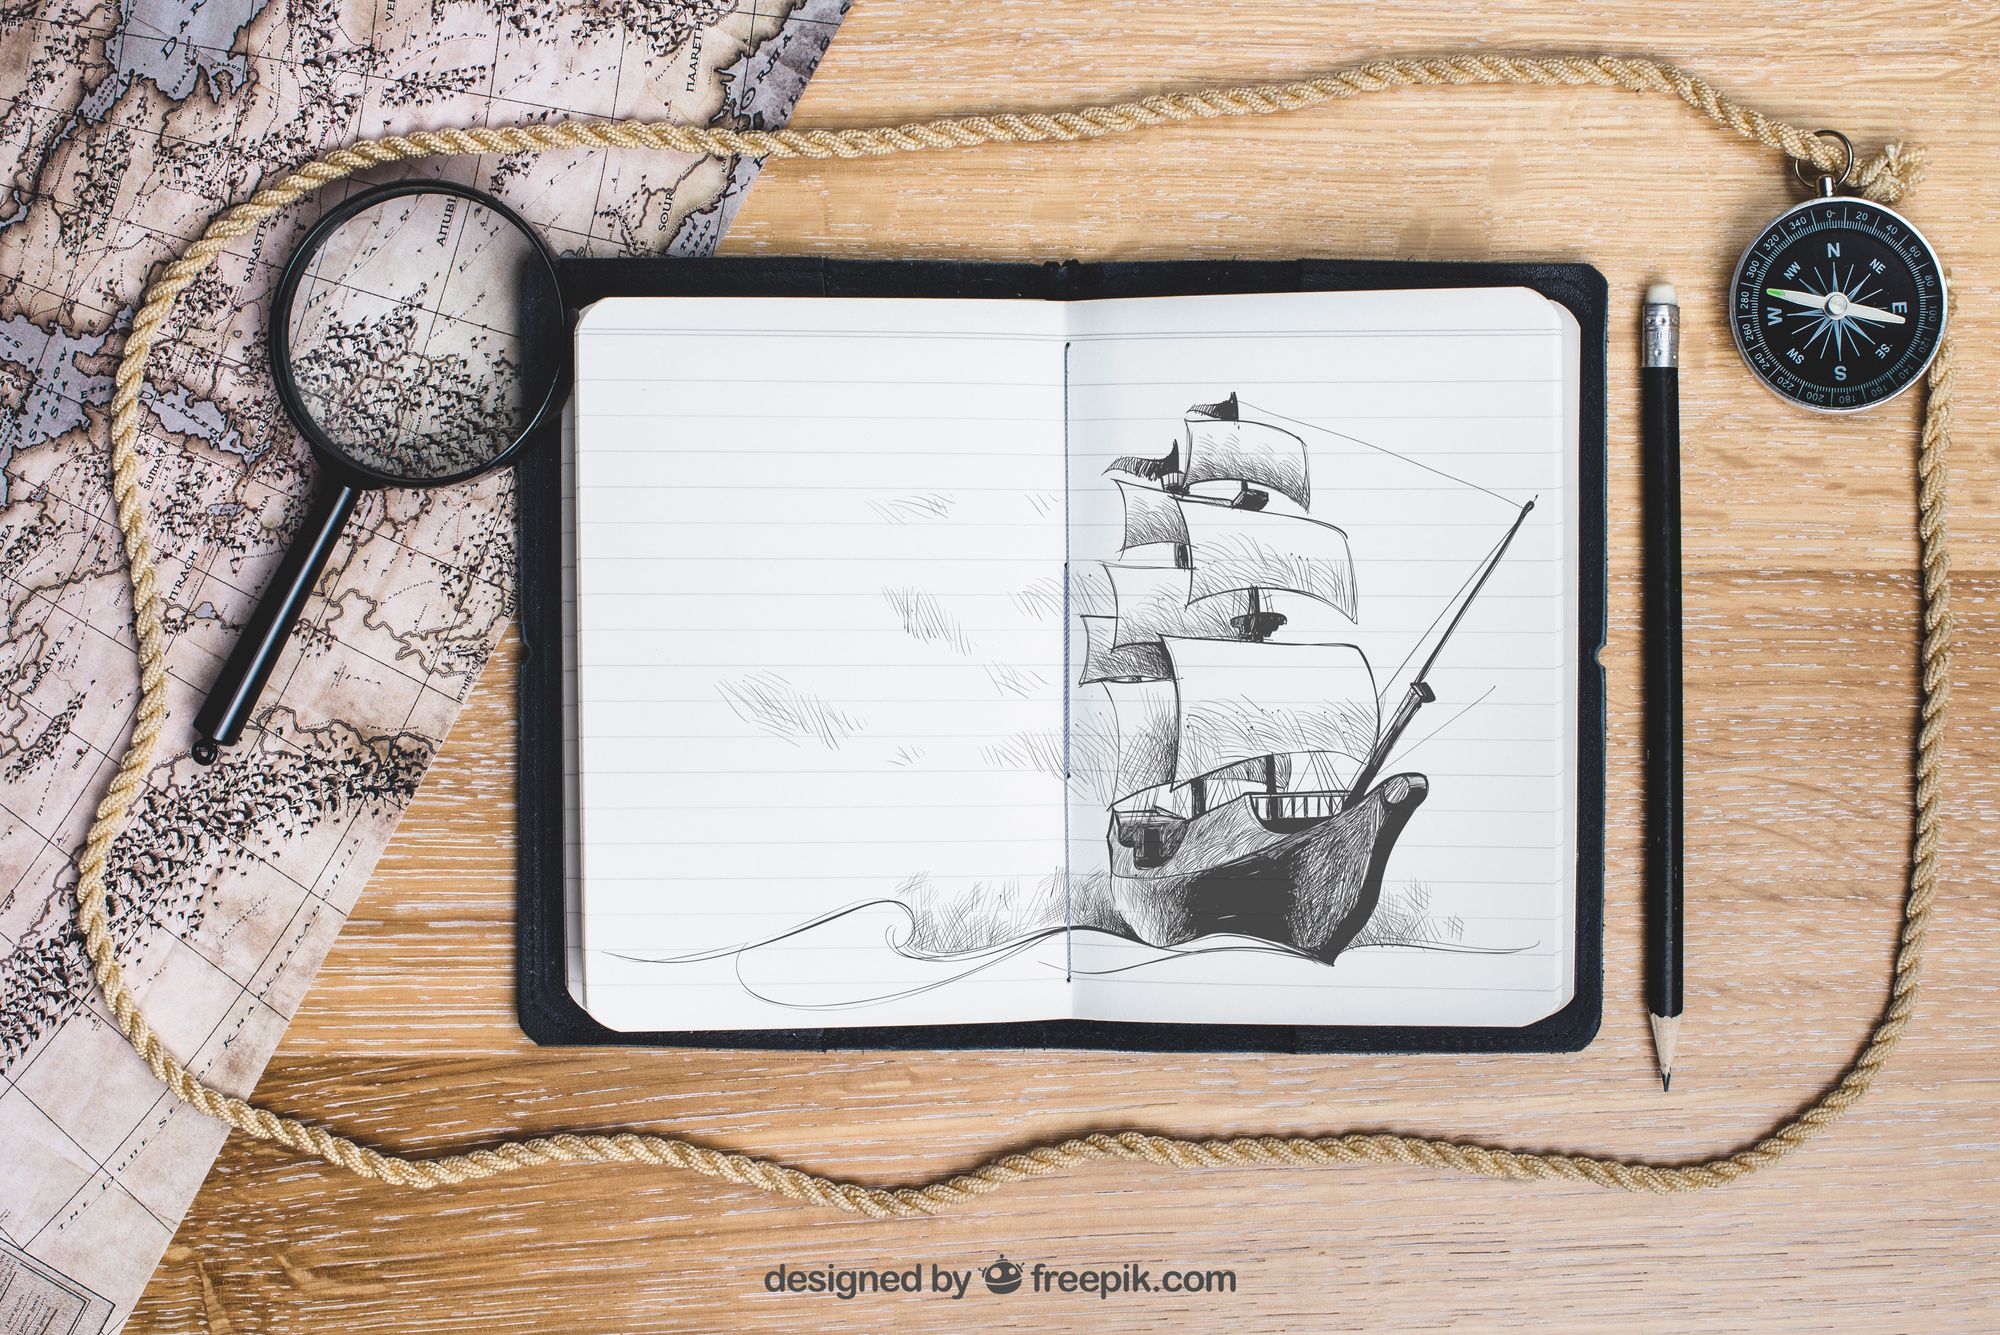 drawing of a galleon in a sketch book